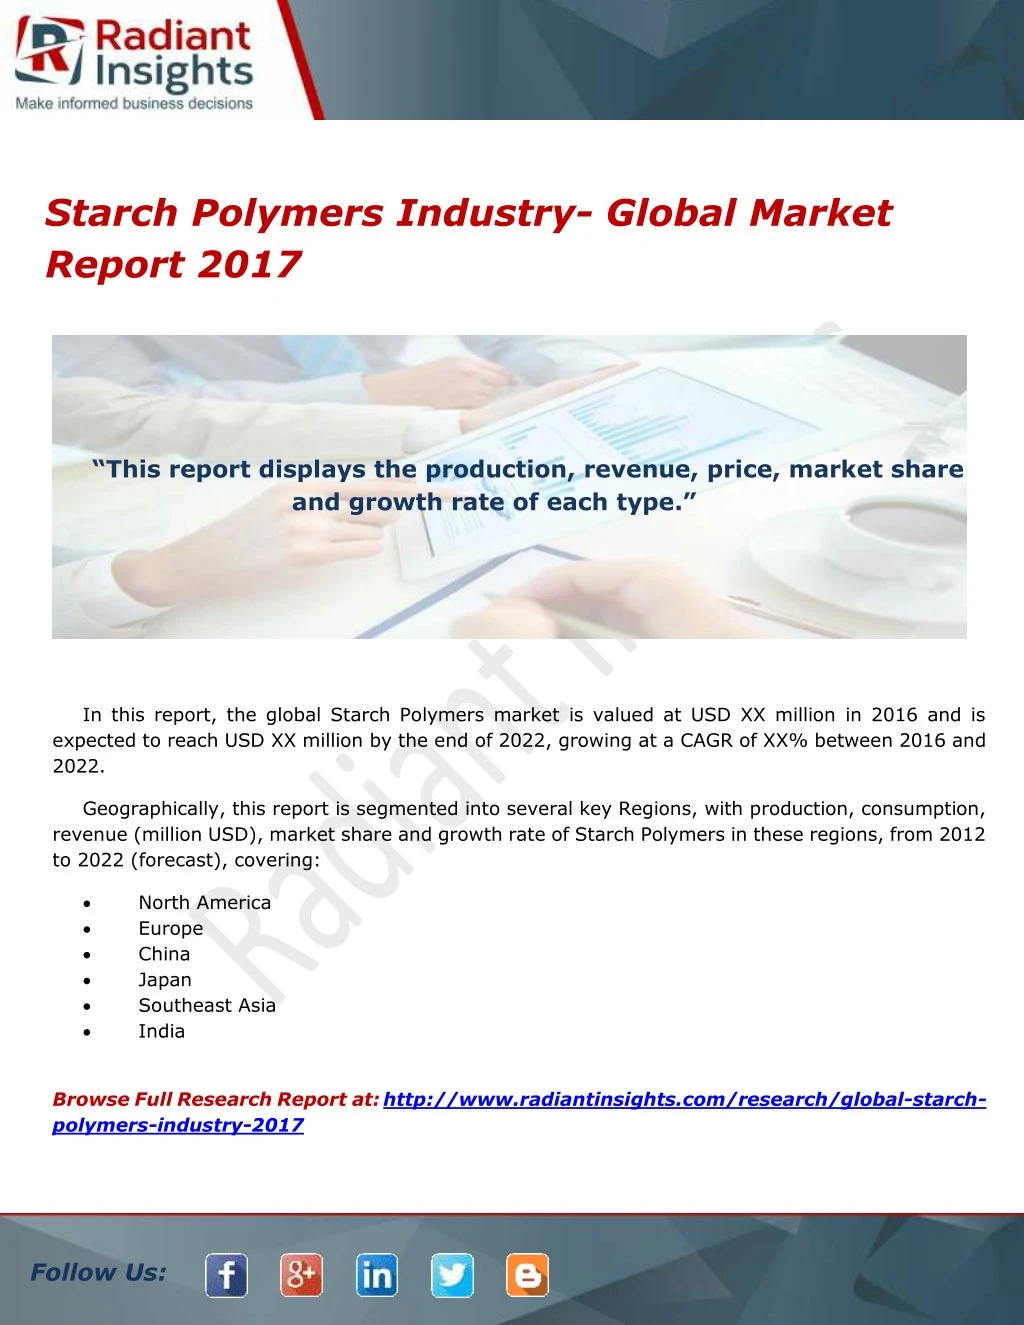 starch polymers industry global market report 2017